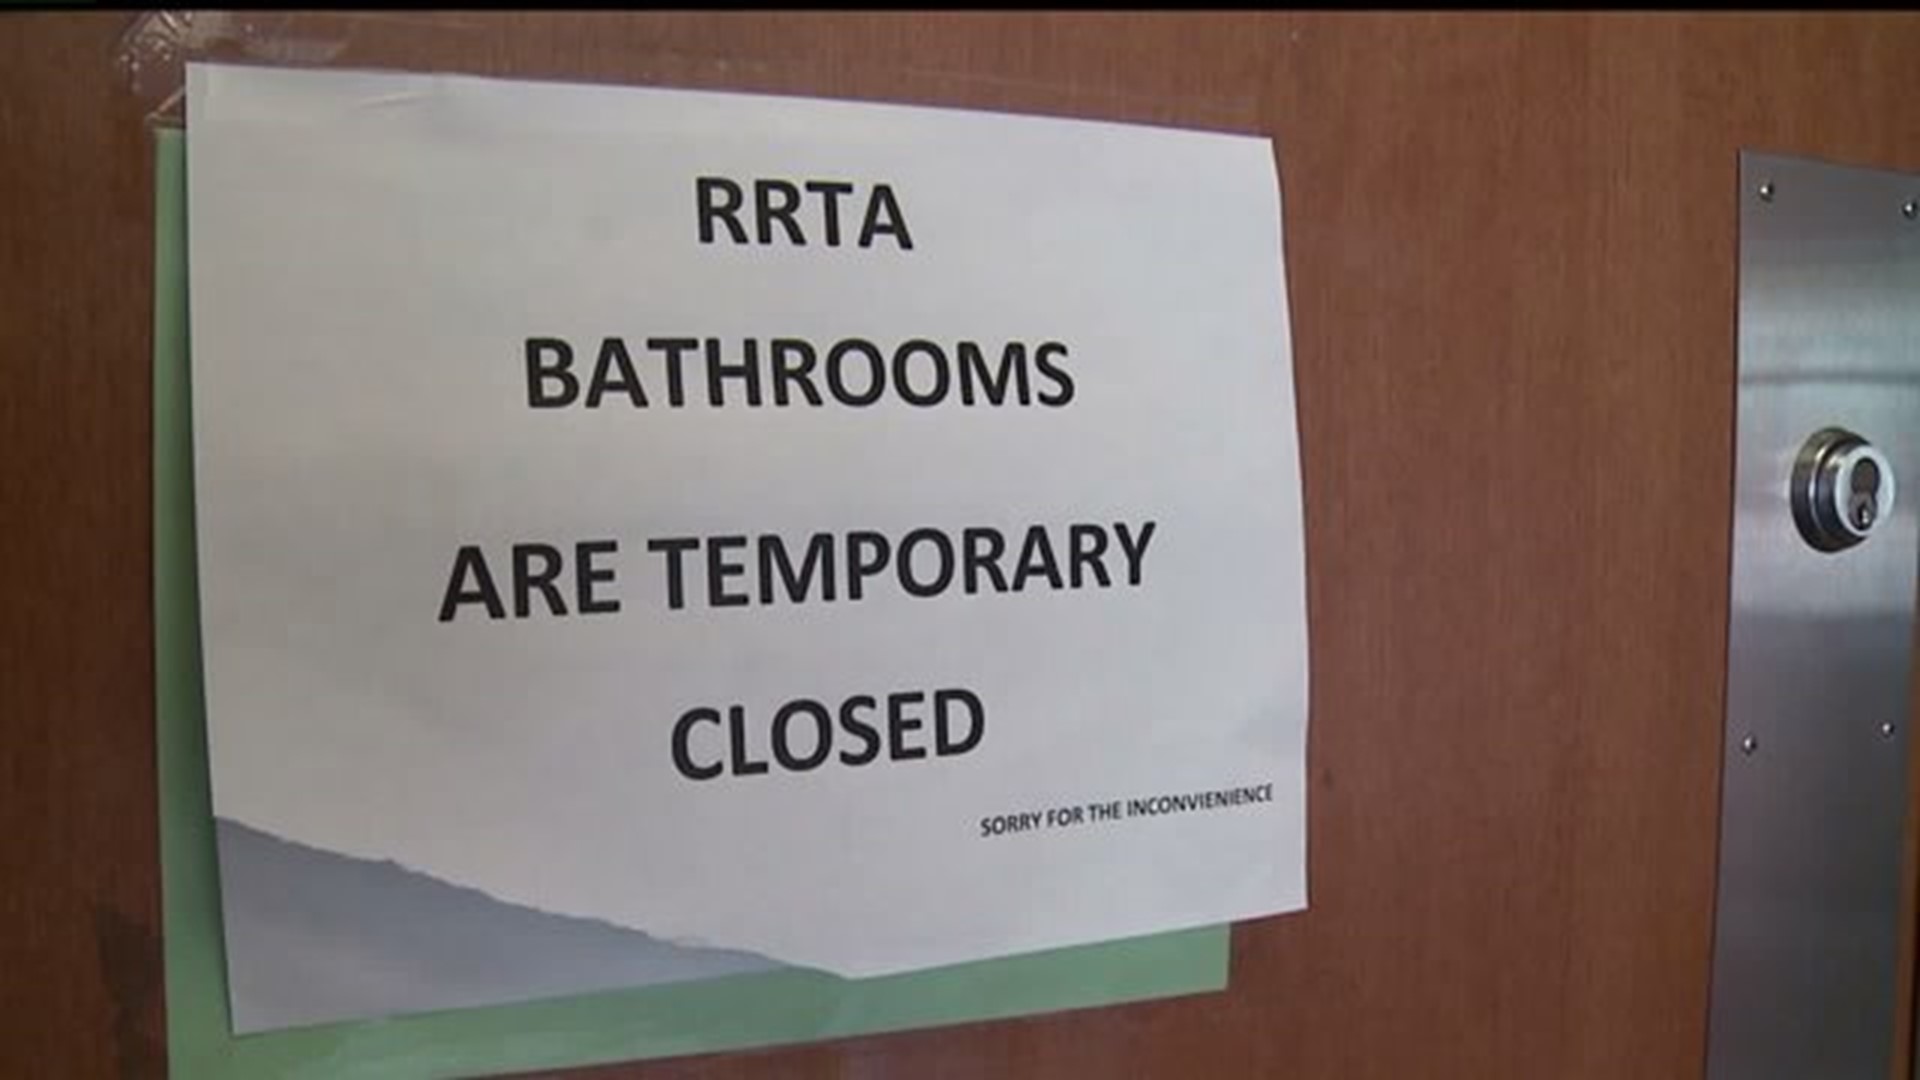 Someone smeared feces all over the walls of a public bathroom in downtown Lancaster multiple times